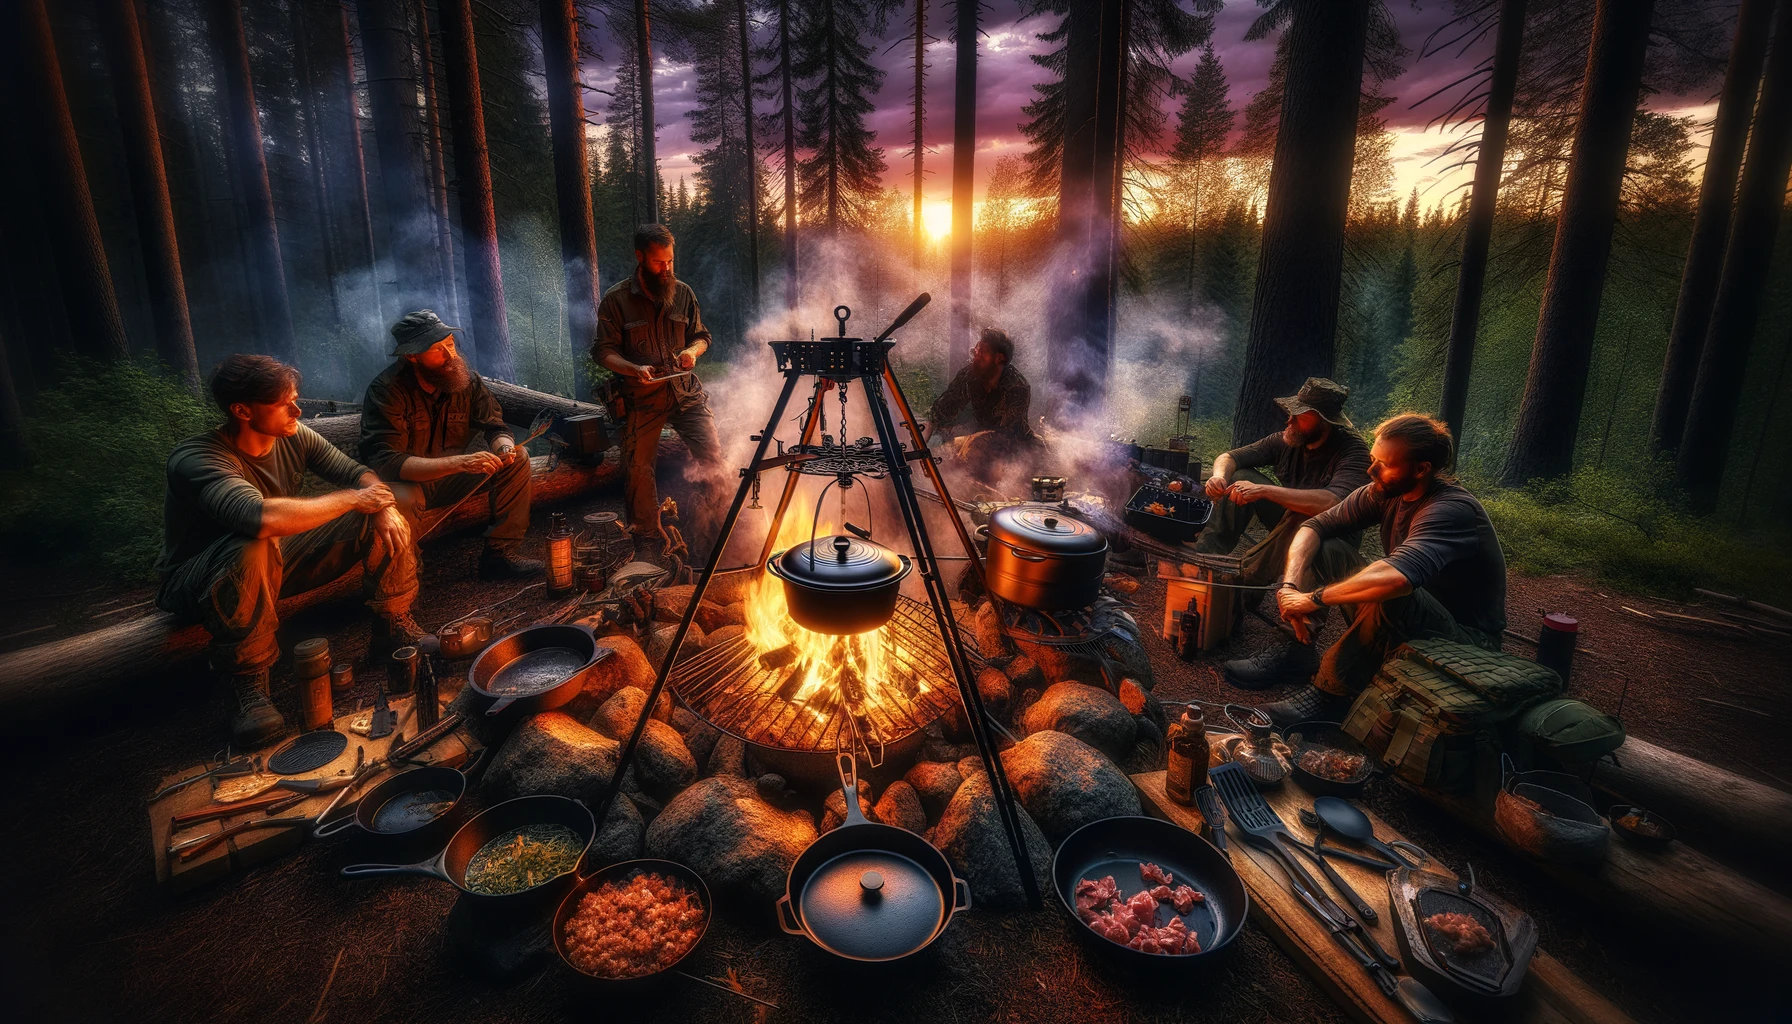 Preppers mastering campfire cooking essentials in a dense forest at dusk, with a detailed setup including a tripod grill, cast iron skillet, and Dutch oven over a roaring fire, surrounded by a community engaged in culinary preparations